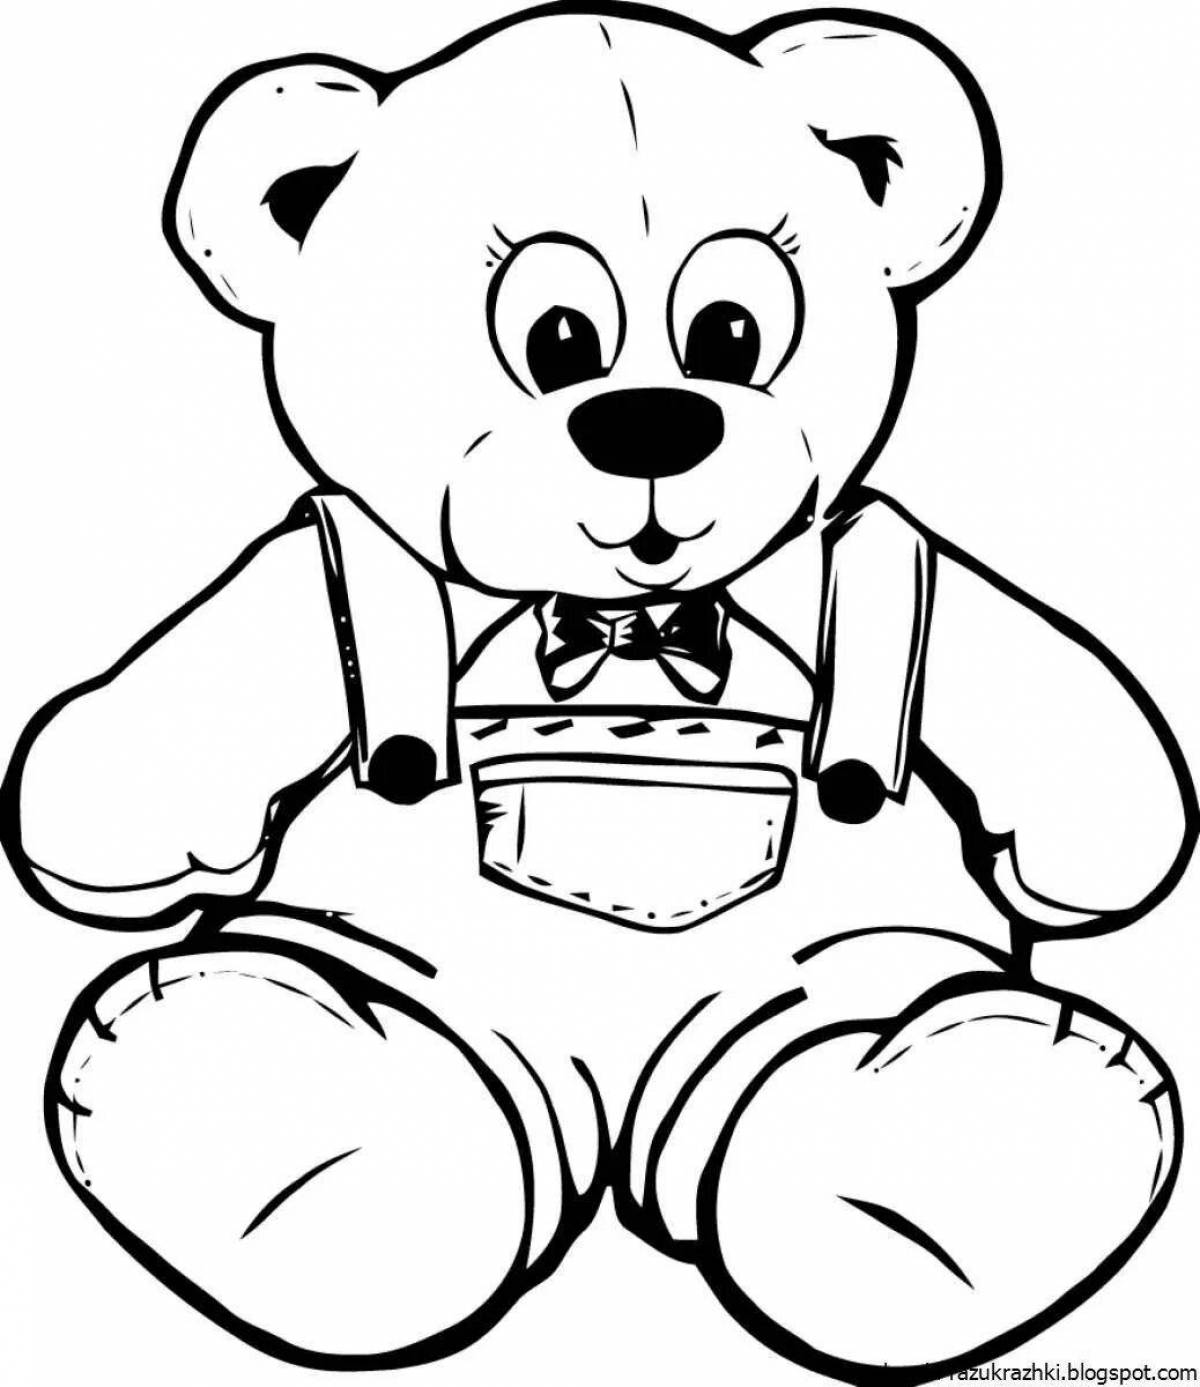 Coloring teddy bear with a bright sun in children's pants